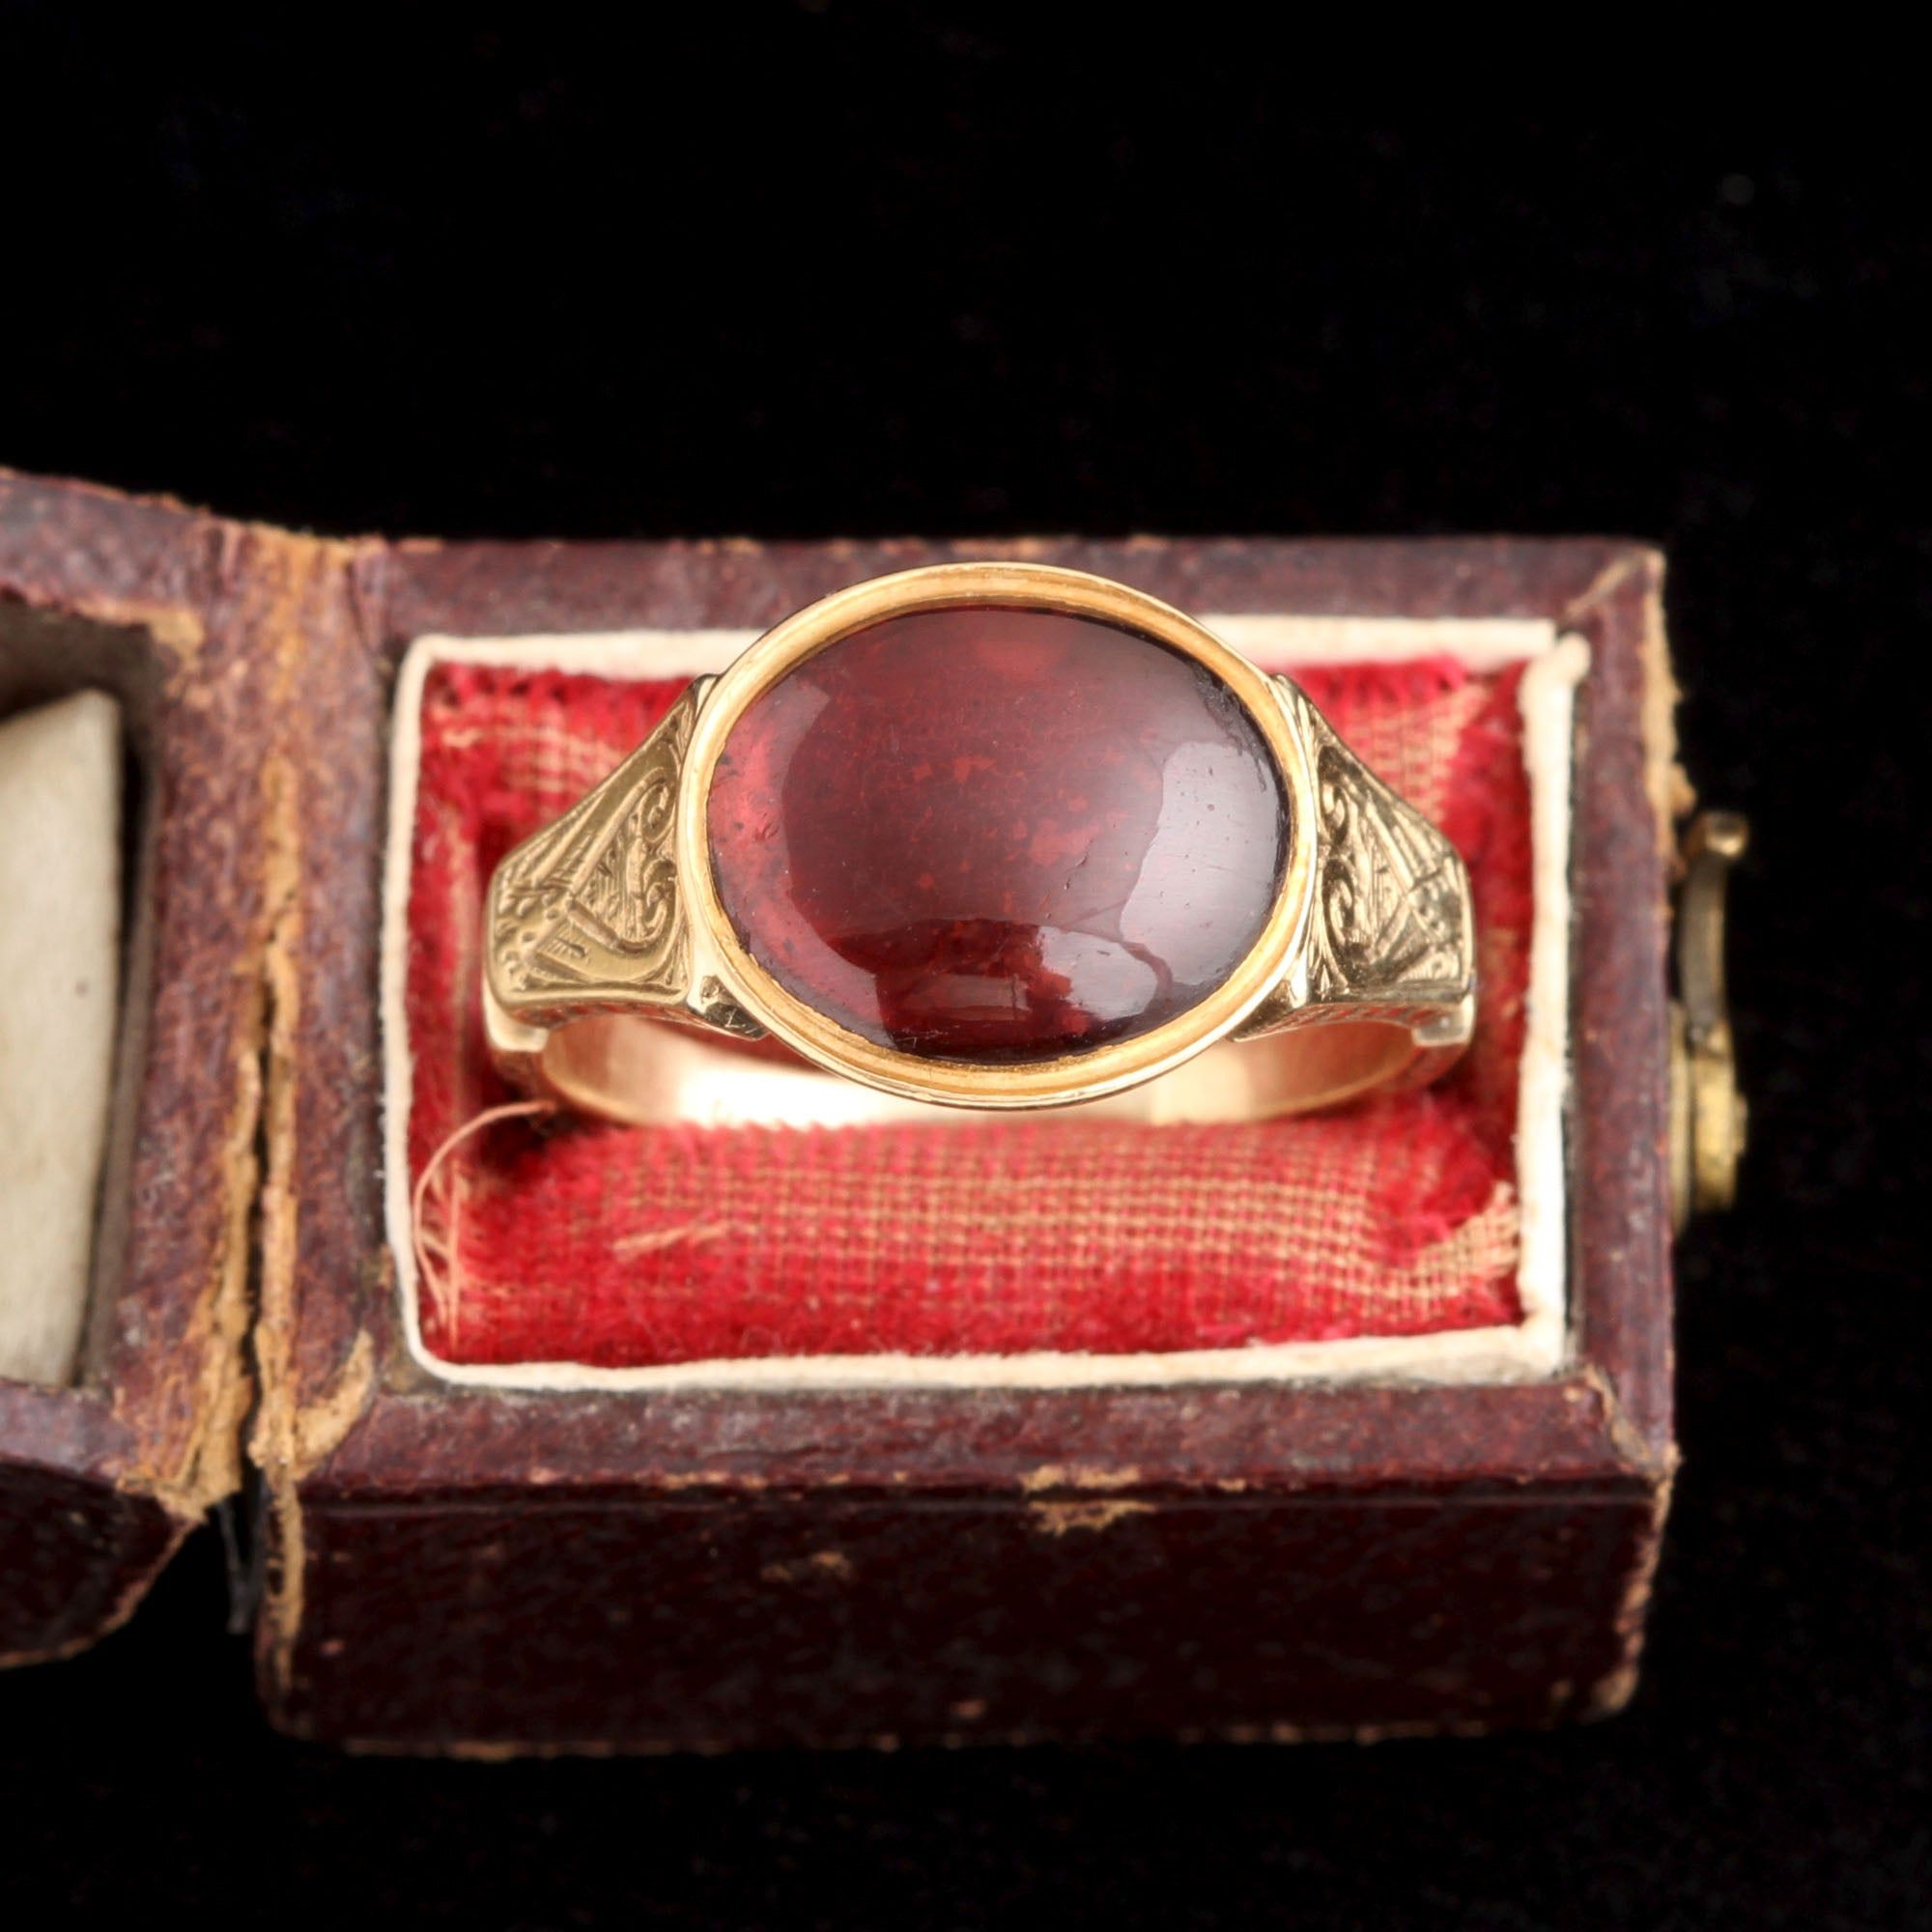 Early Victorian "AF to RM" Garnet Cabochon Ring